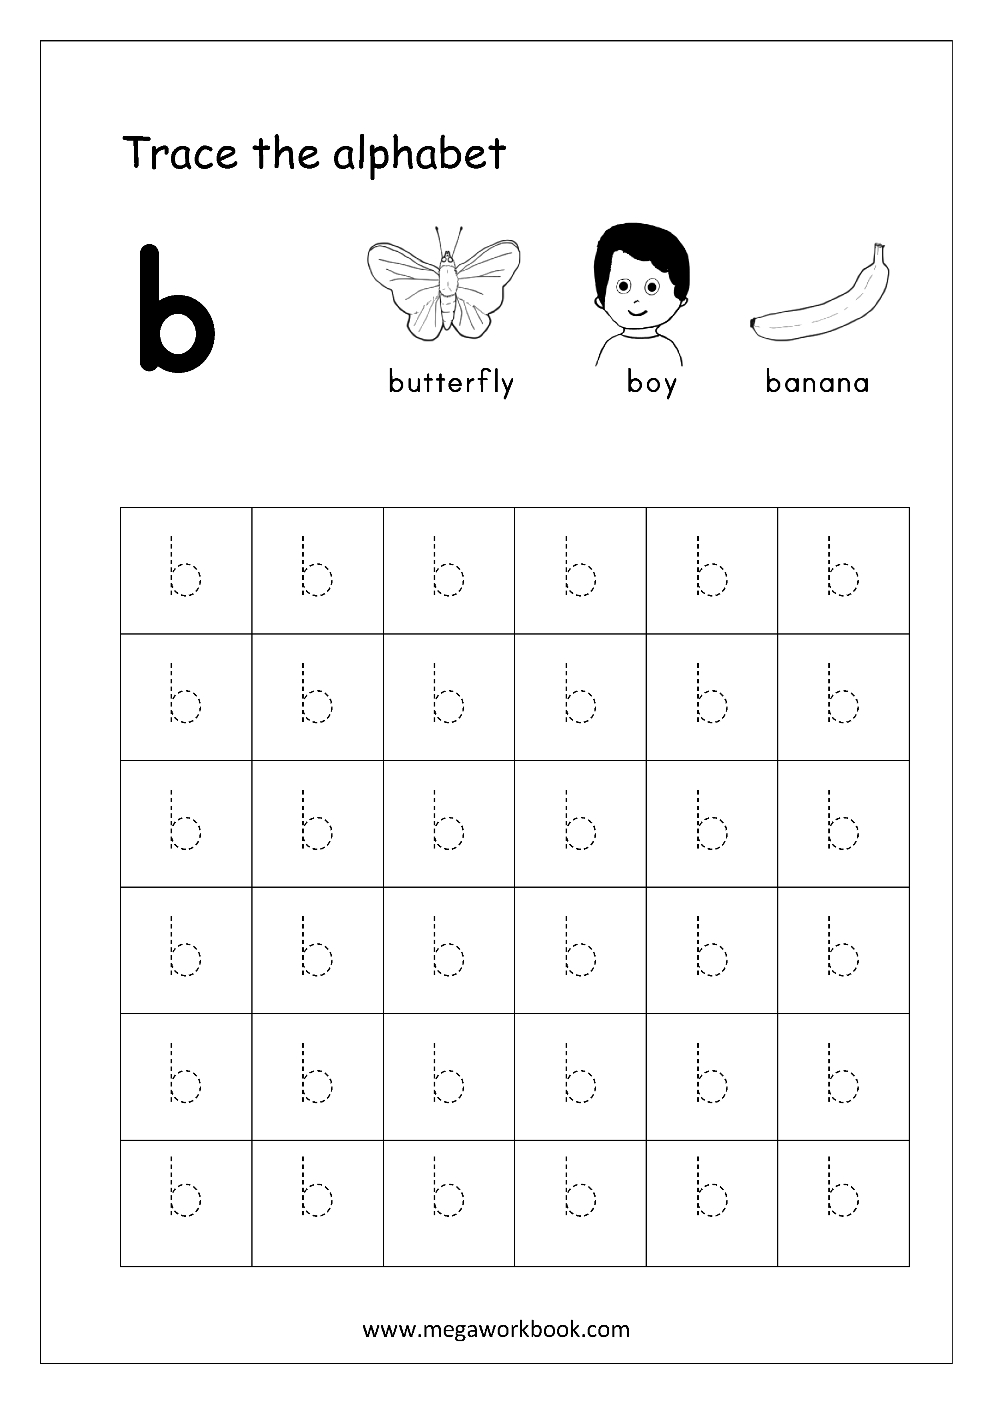 Tracing Small Letter A Worksheet TracingLettersWorksheets